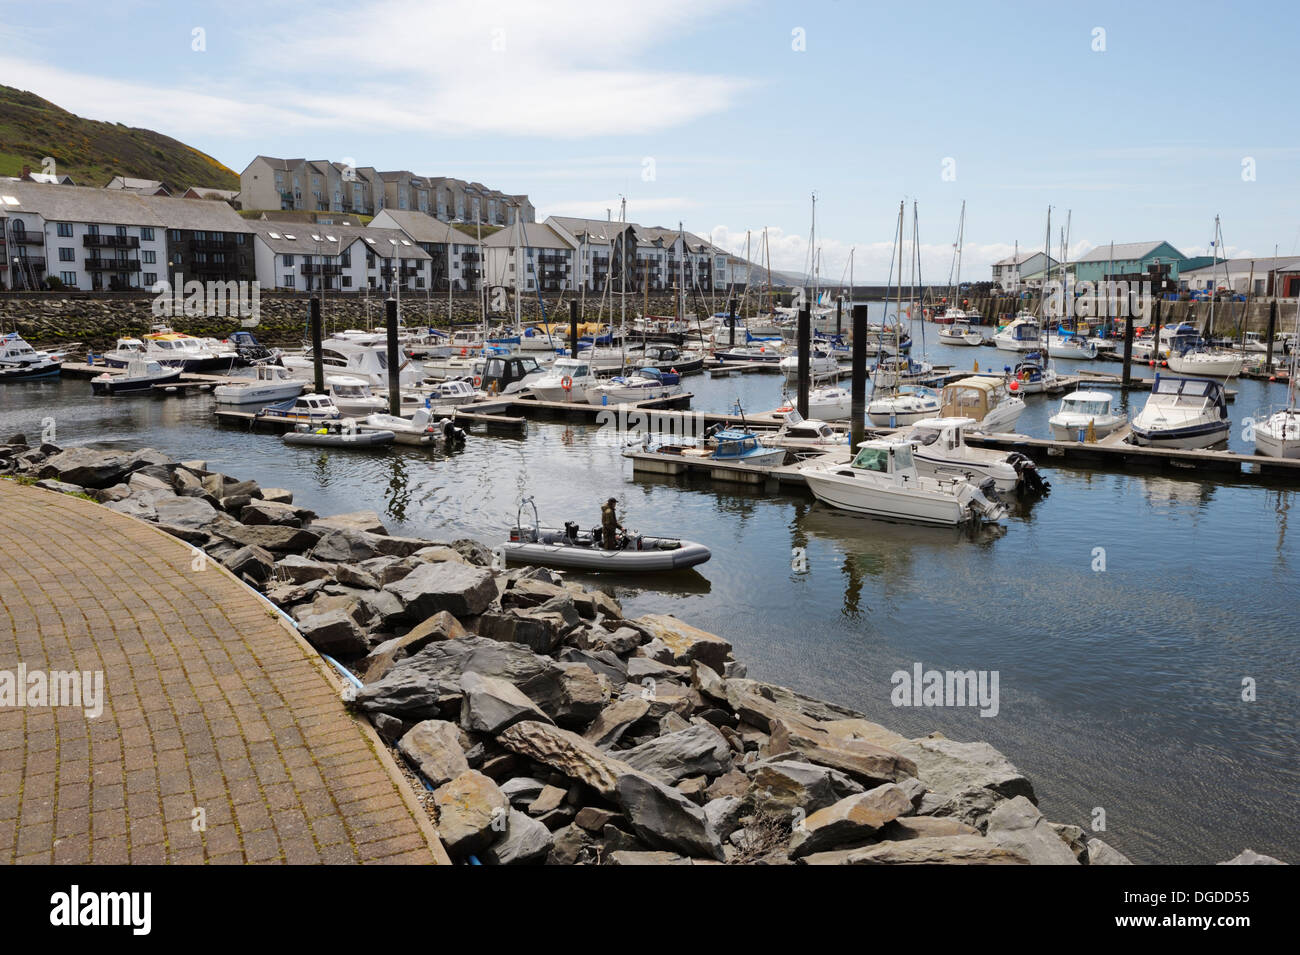 Floating pontoons with moored private leisure, pleasure boats, with waterside housing behind, Aberystwyth, Wales, UK. Stock Photo